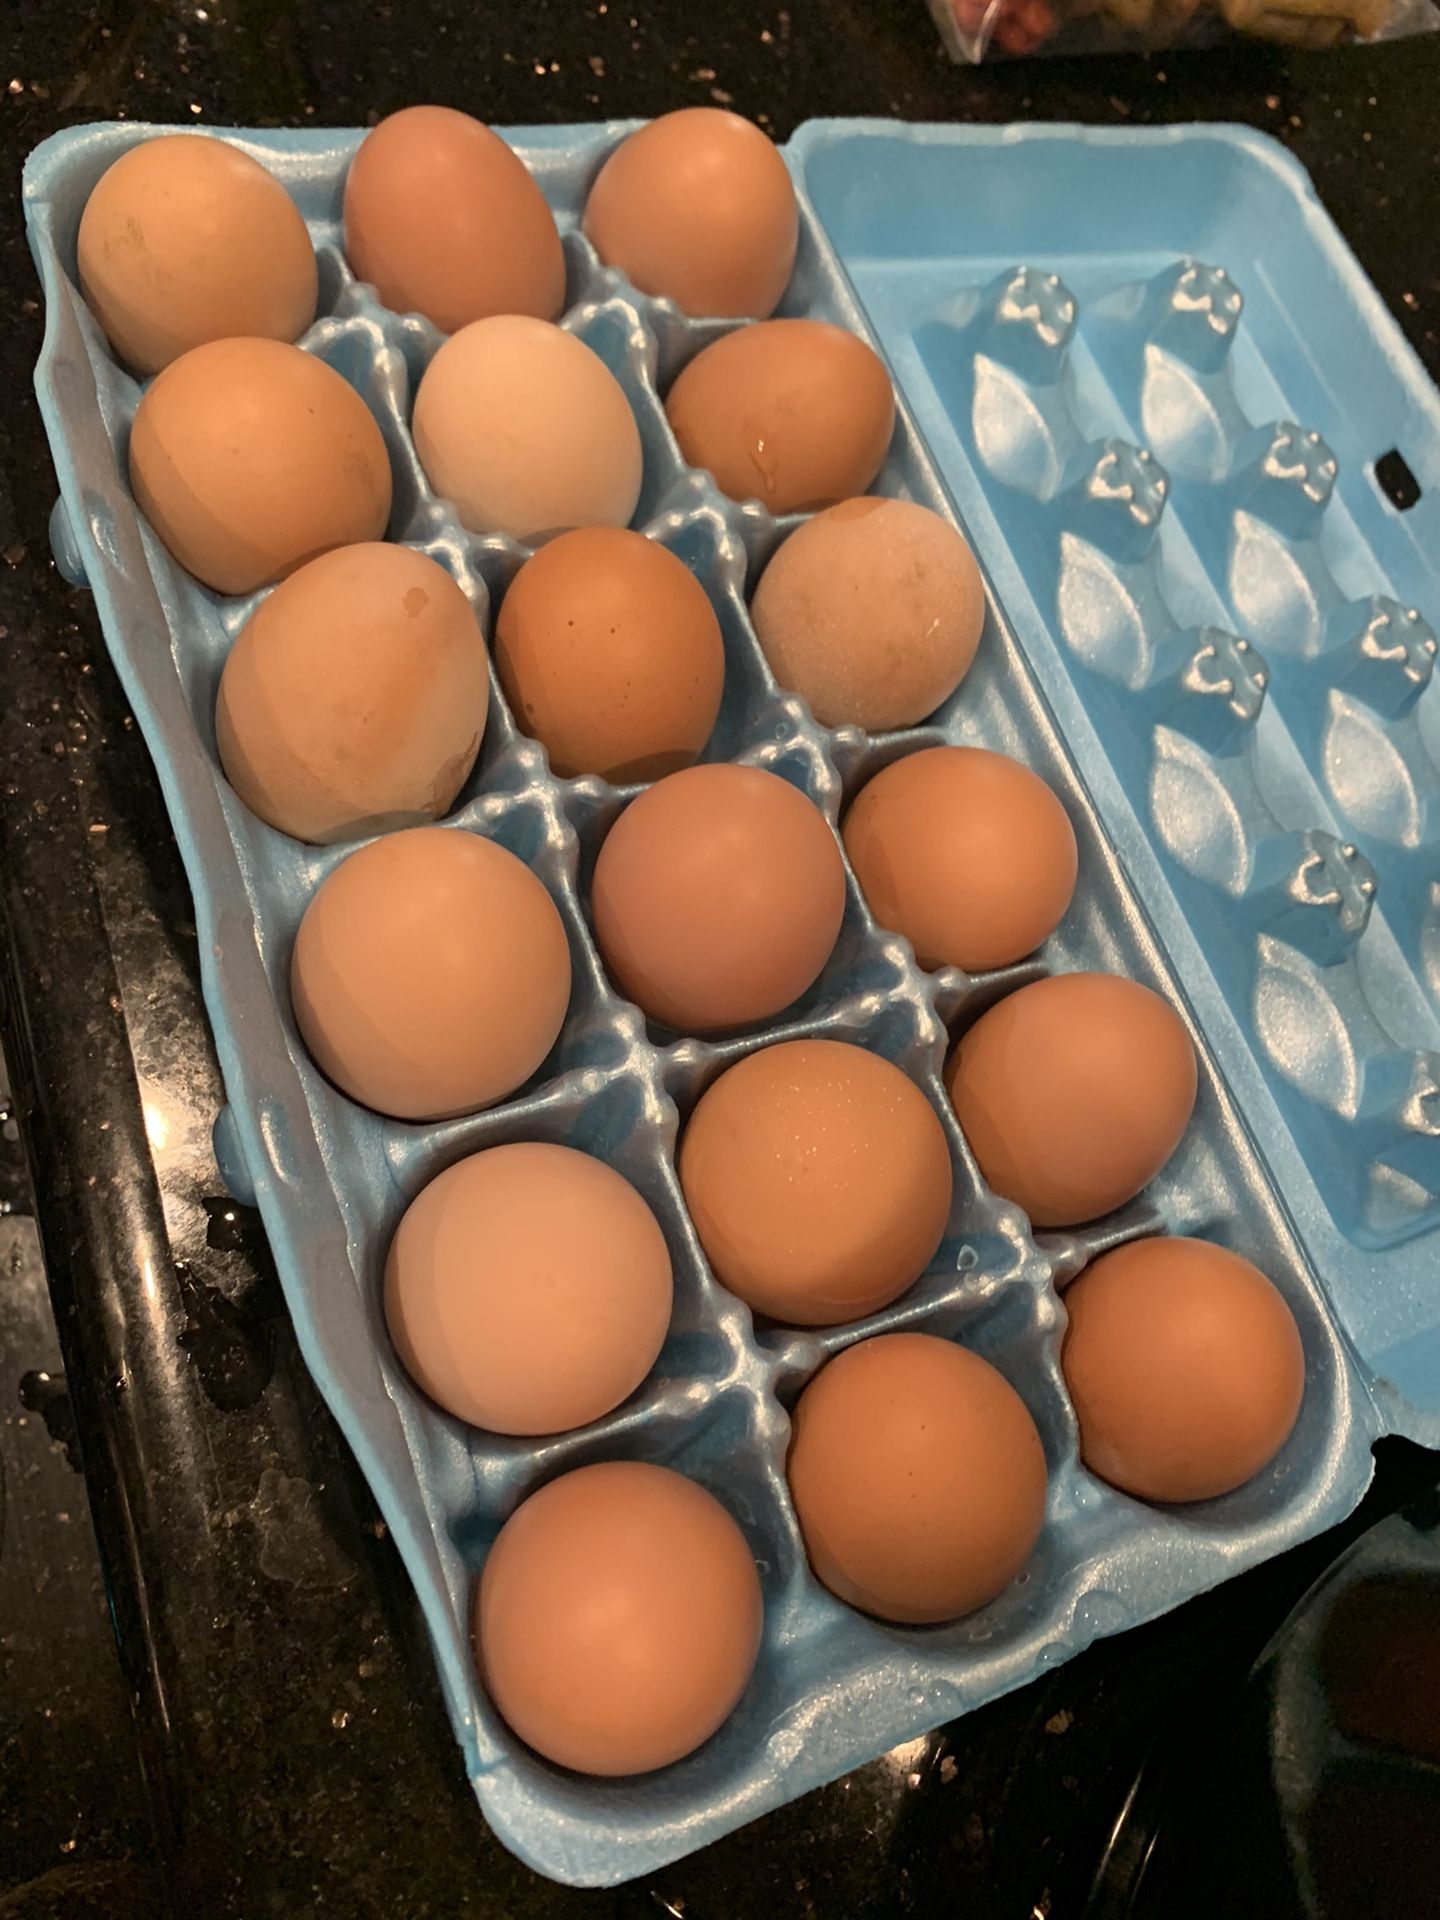 Yard Eggs For Sale